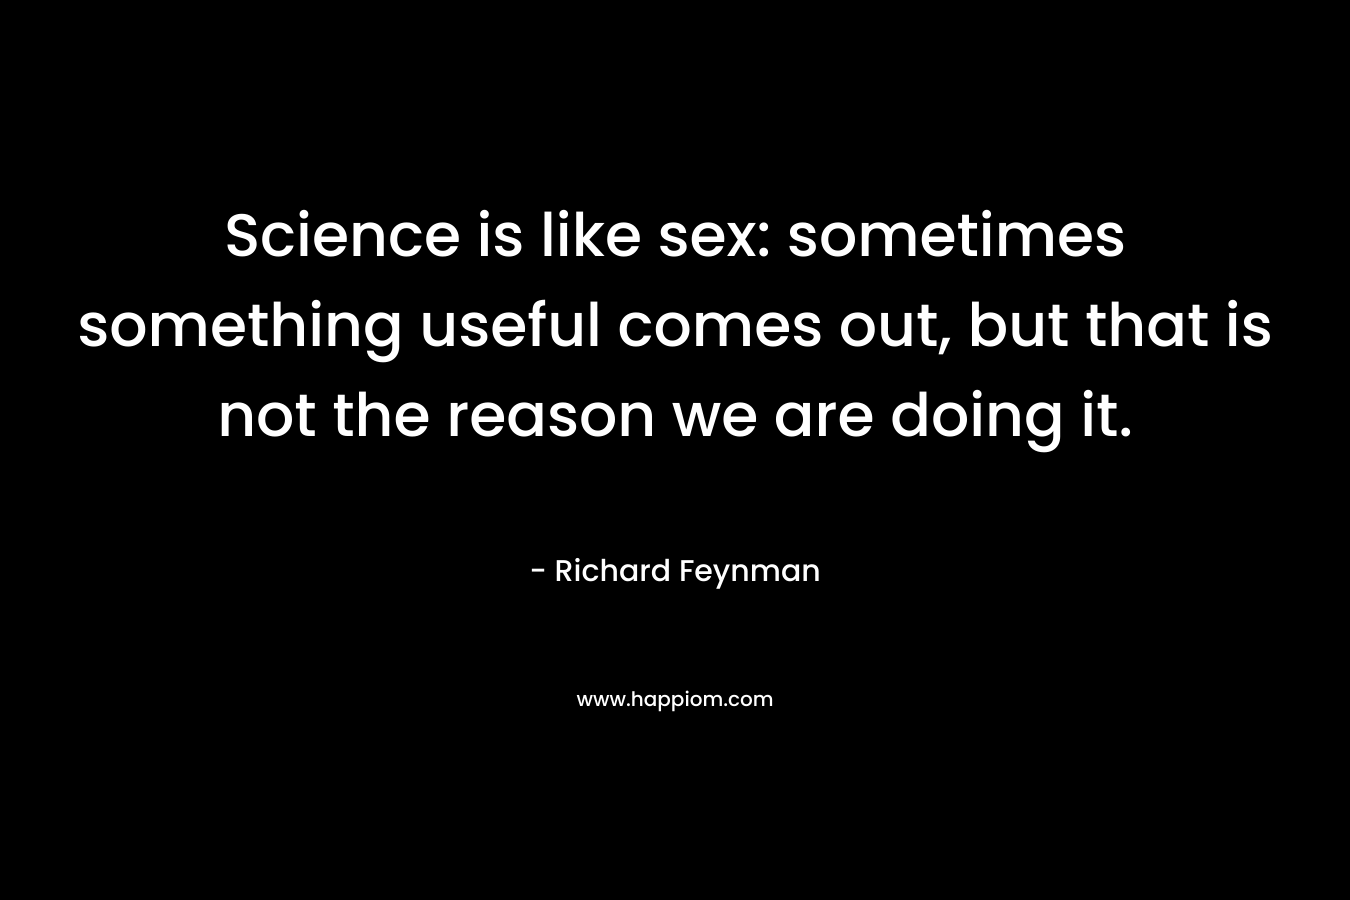 Science is like sex: sometimes something useful comes out, but that is not the reason we are doing it. 